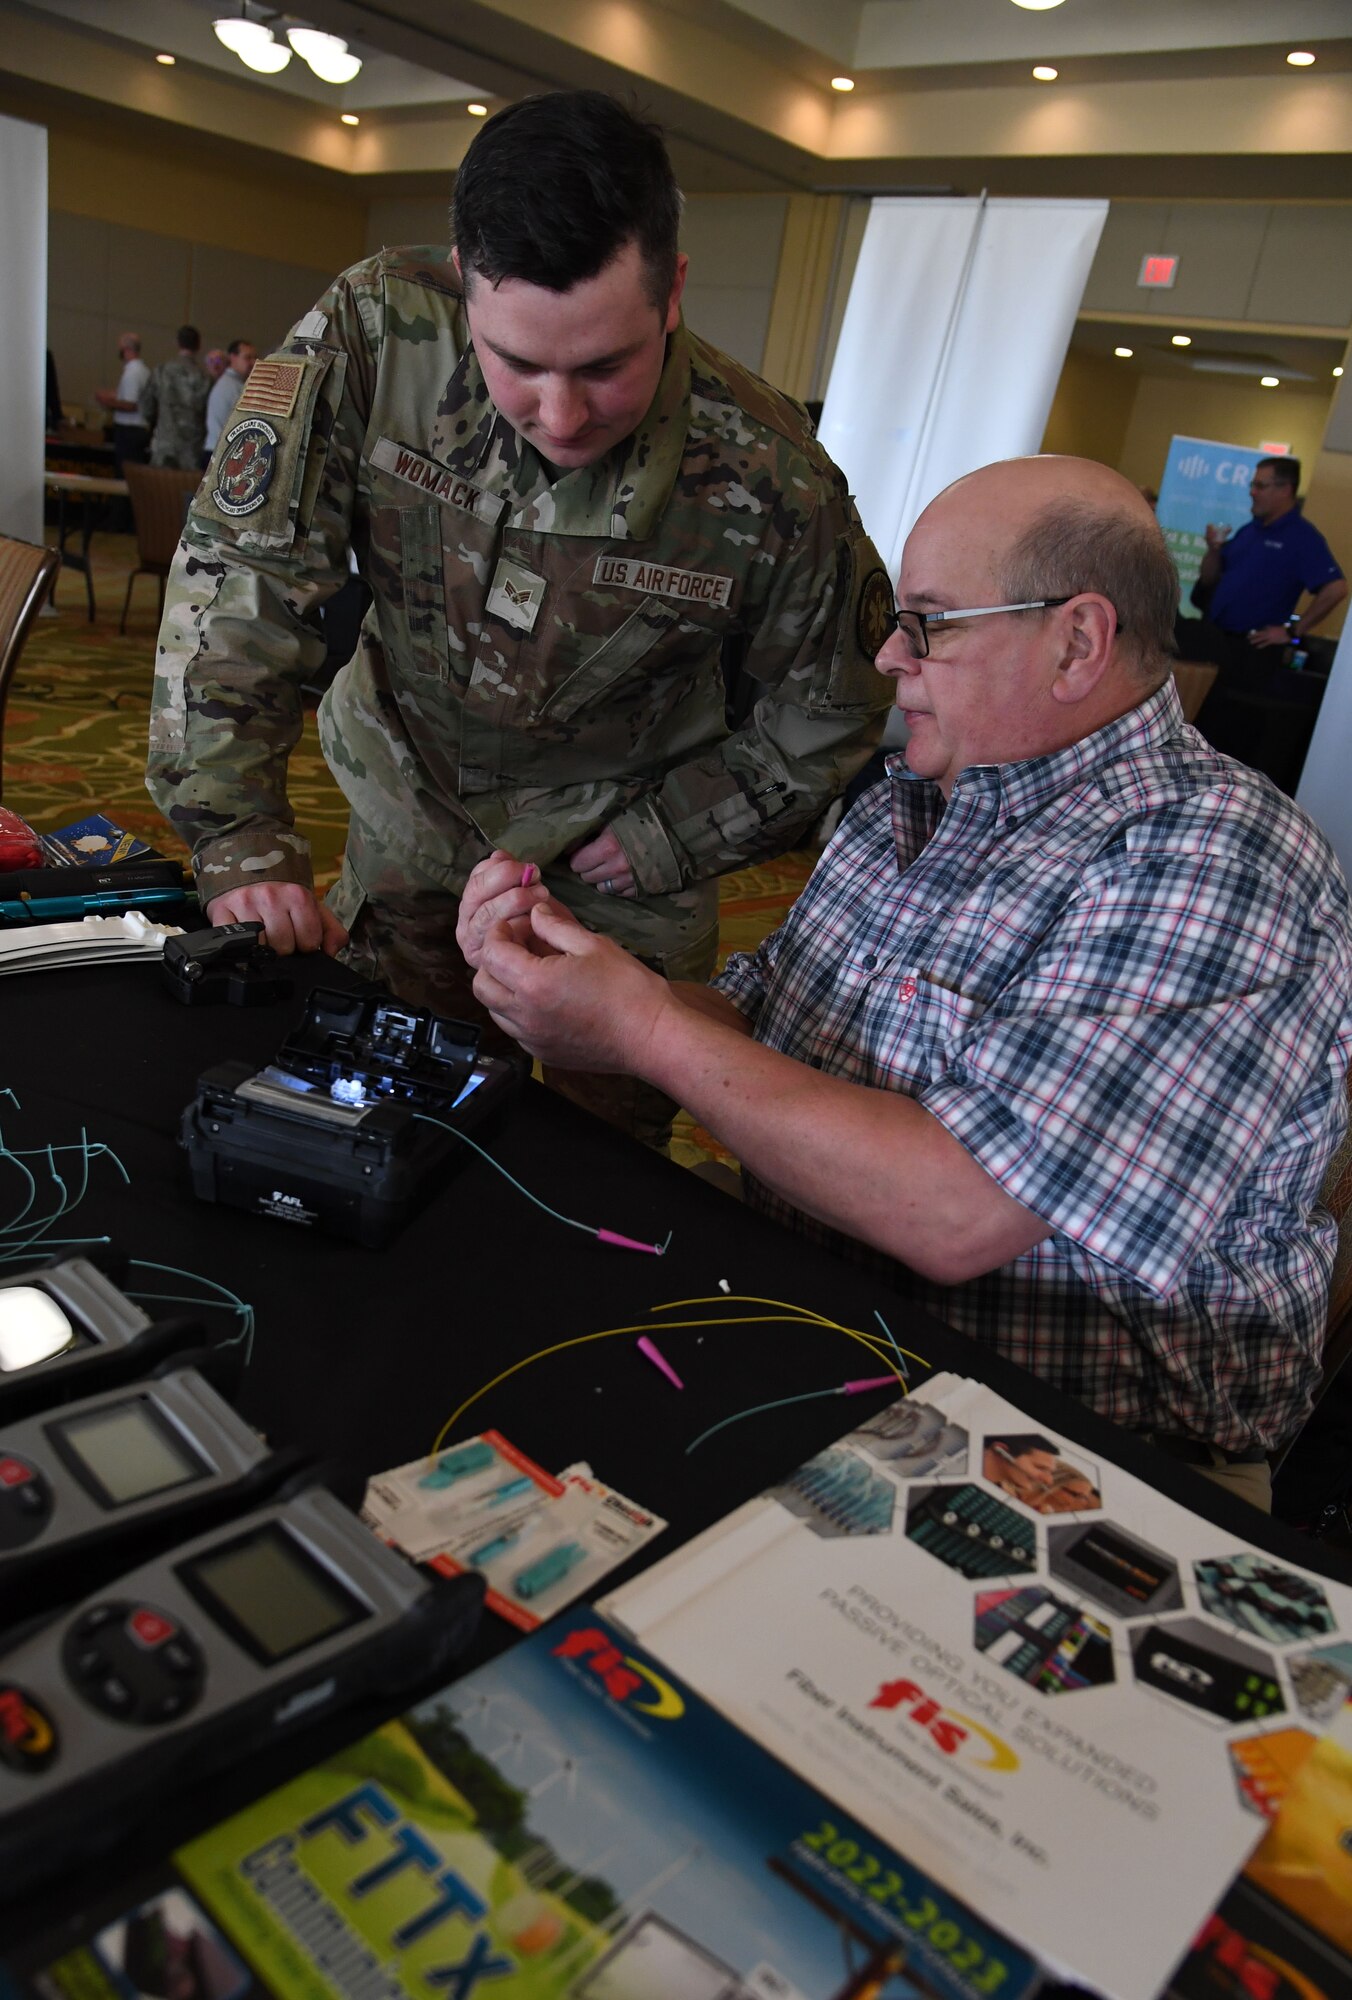 John DeMetro, Fis corporate accounts manager, provides an equipment overview to U.S. Air Force Senior Airman Taylor Womack, 81st Healthcare Operations Squadron medical technician, during the Technology Expo inside the Bay Breeze Event Center at Keesler Air Force Base, Mississippi, Feb. 16, 2023.